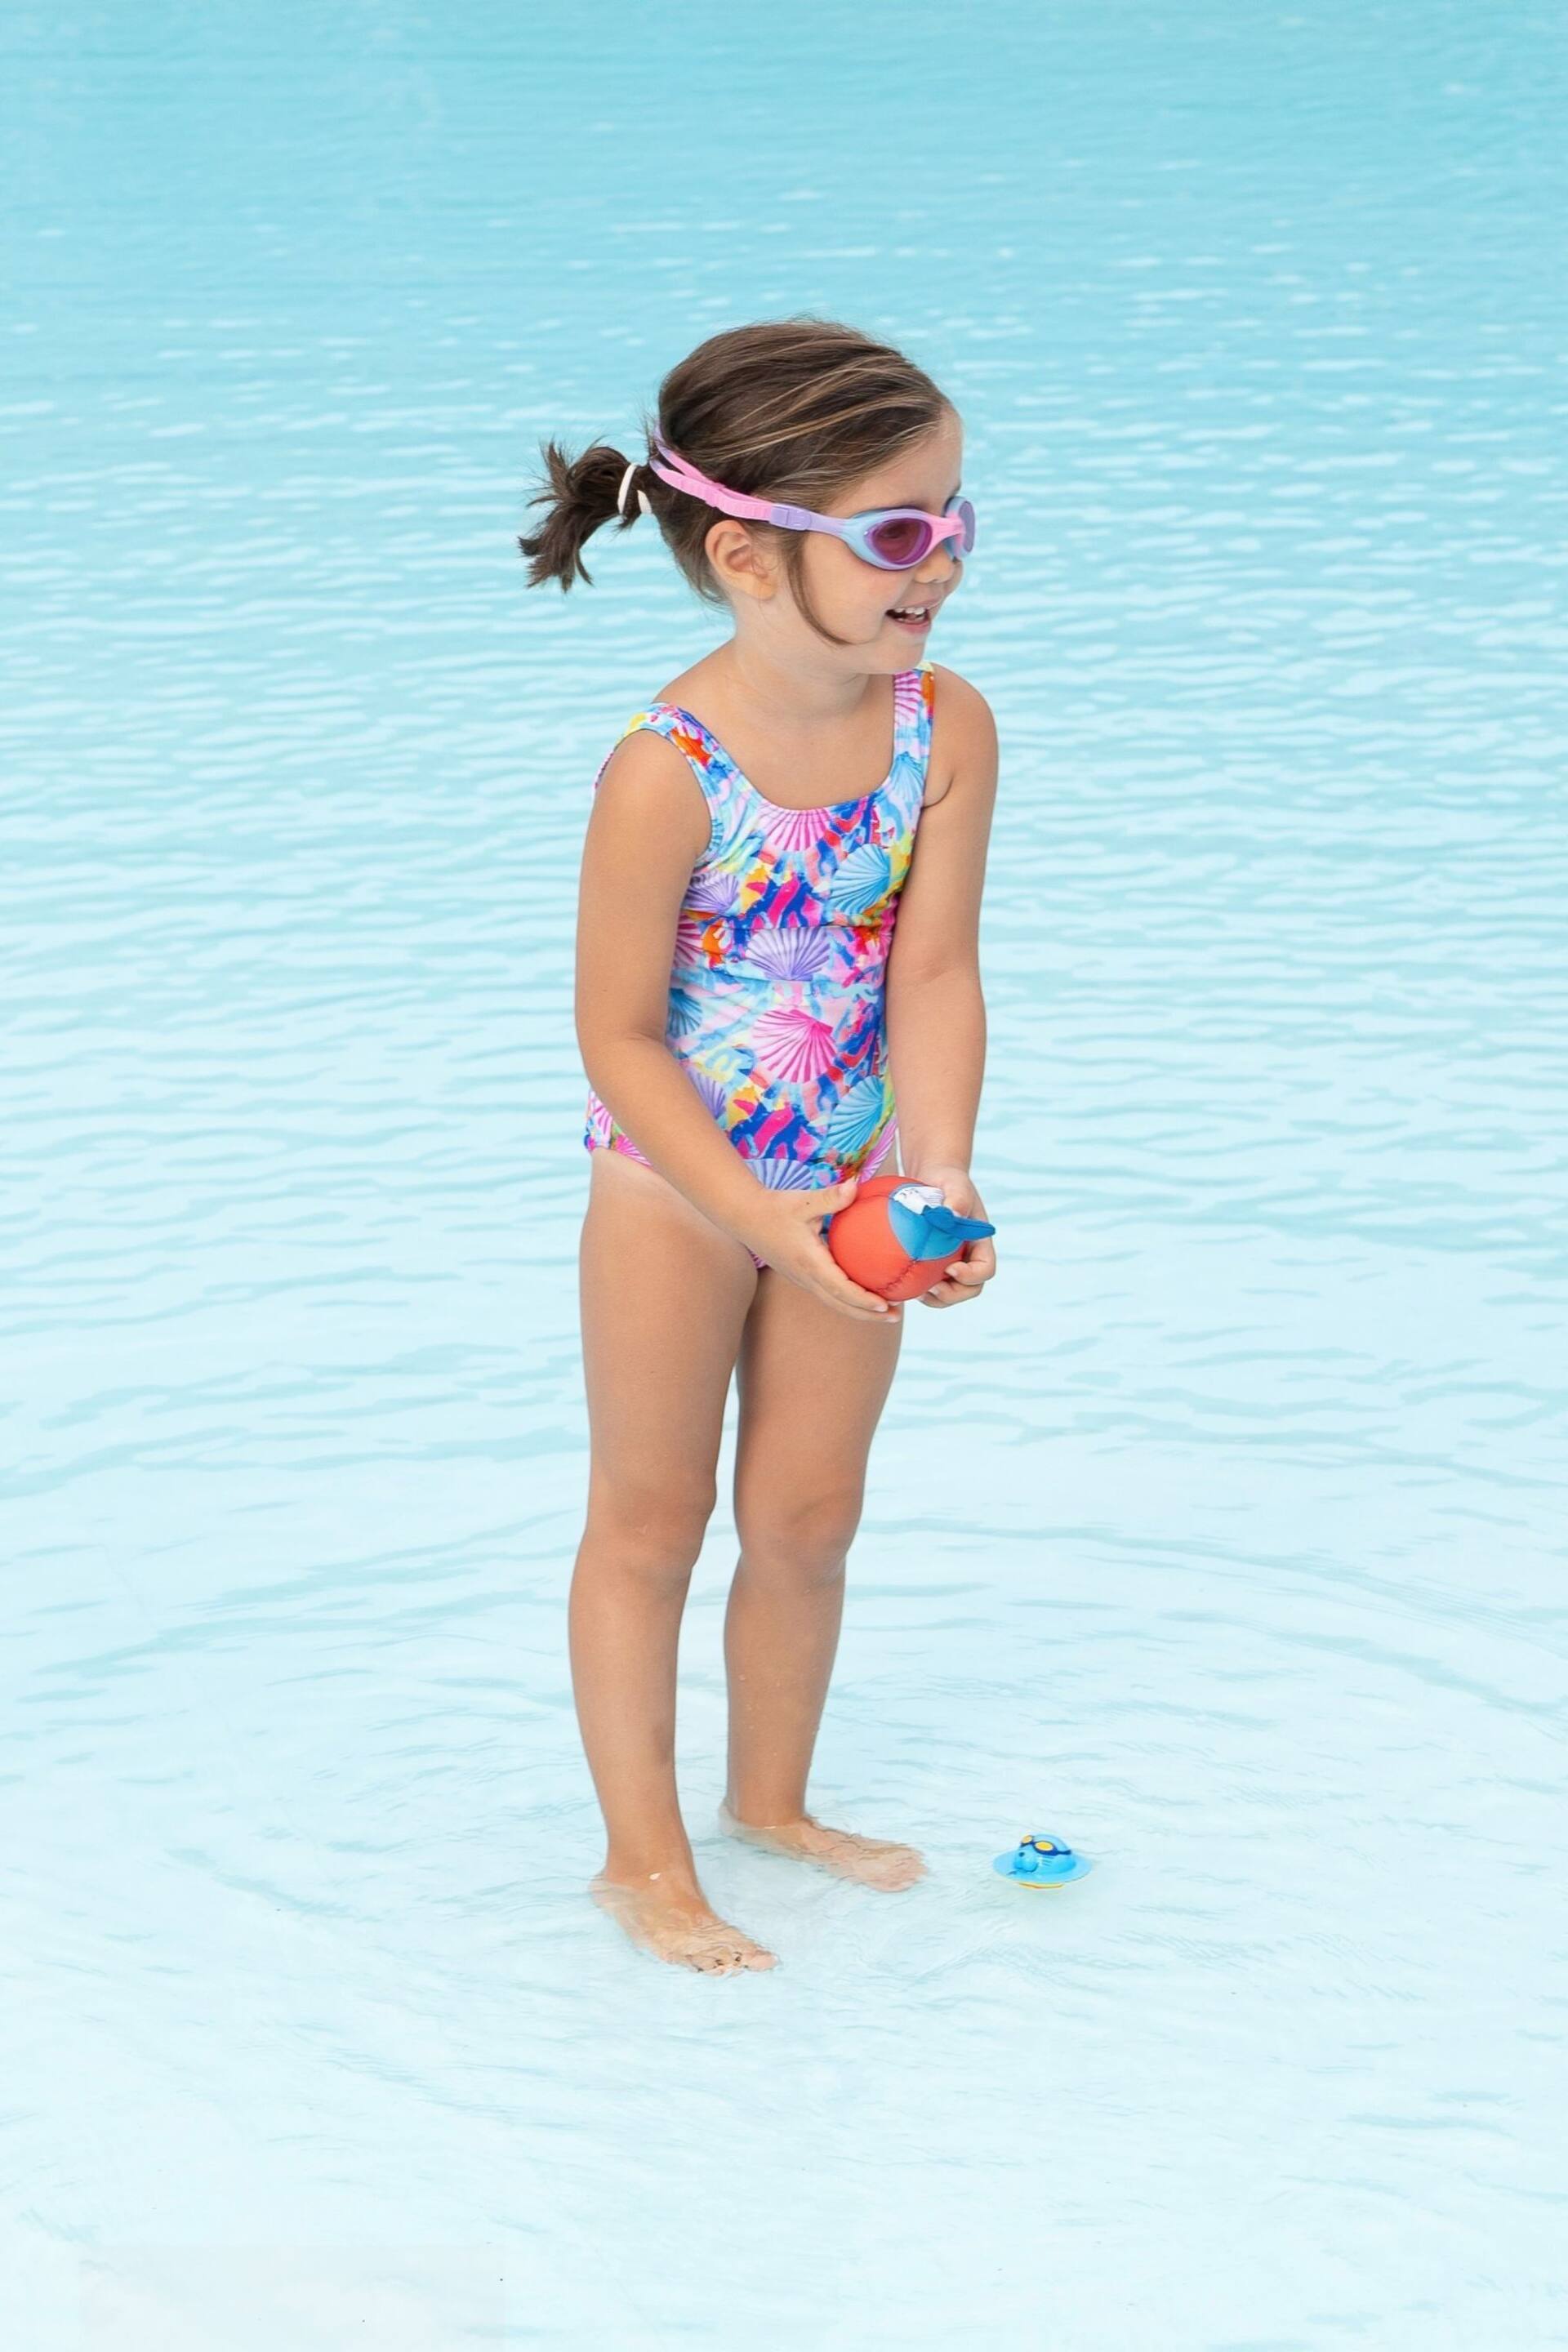 Zoggs Girls Scoopback One Piece Swimsuit - Image 1 of 7